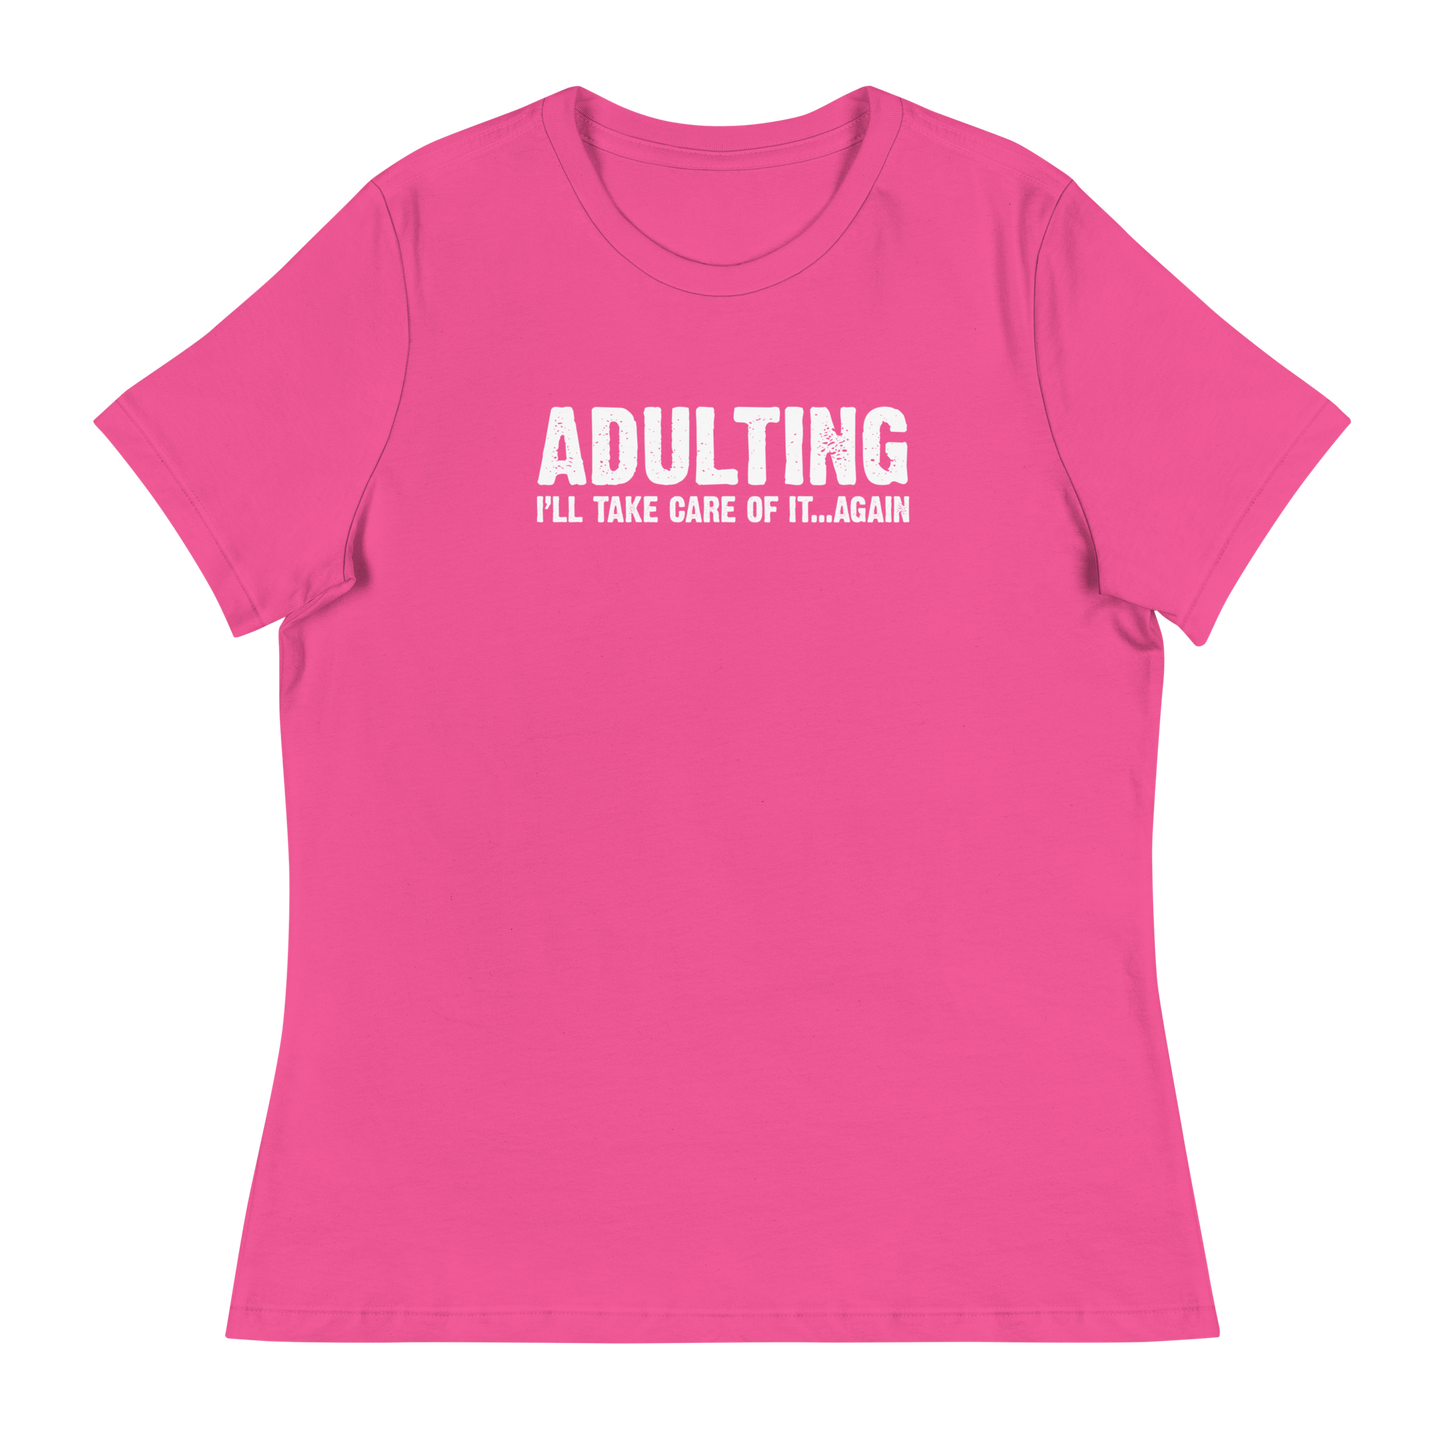 Women's - Adulting, I'll take care of it ... again - Funny T-Shirt